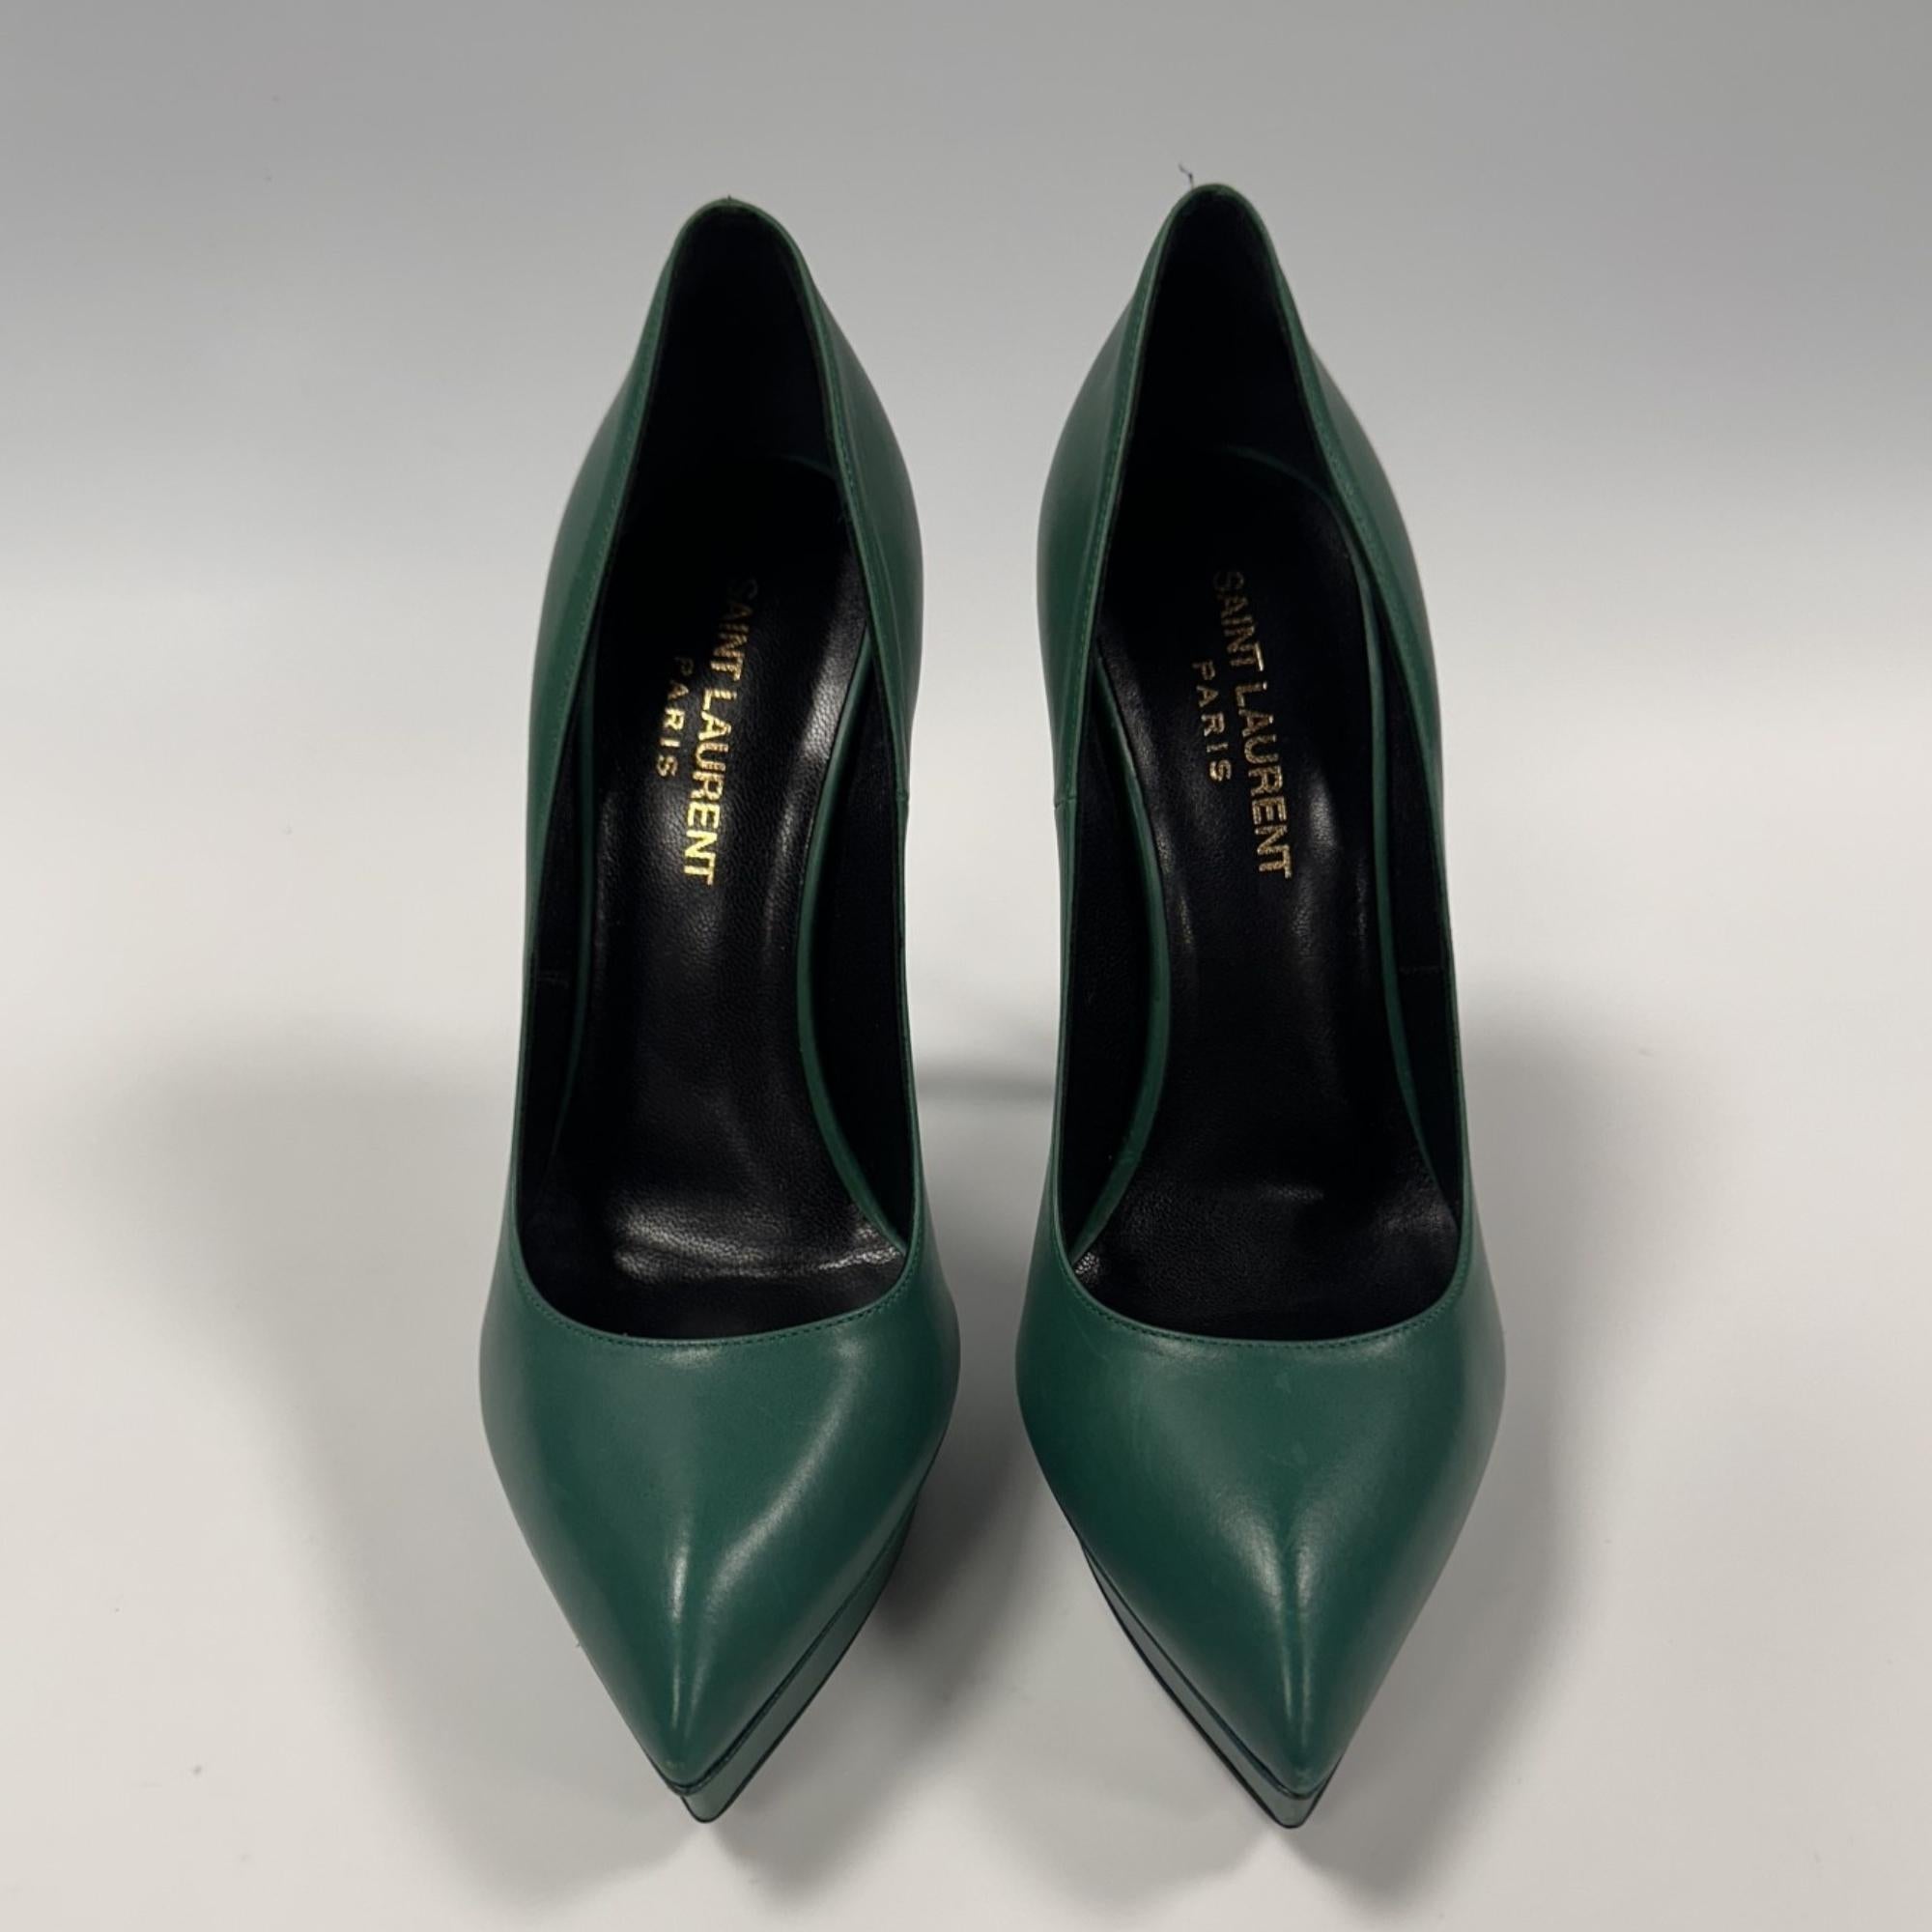 Color: Green
Material: Leather
Item Code: 320221
Size: 37 EU / X US
Heel Height: 120 mm / 47”
Condition: Good. Faint hairline marks to leather. Light scratches and stains to the under soles.
Comes With: Dust Bag And Box 

Made in Italy